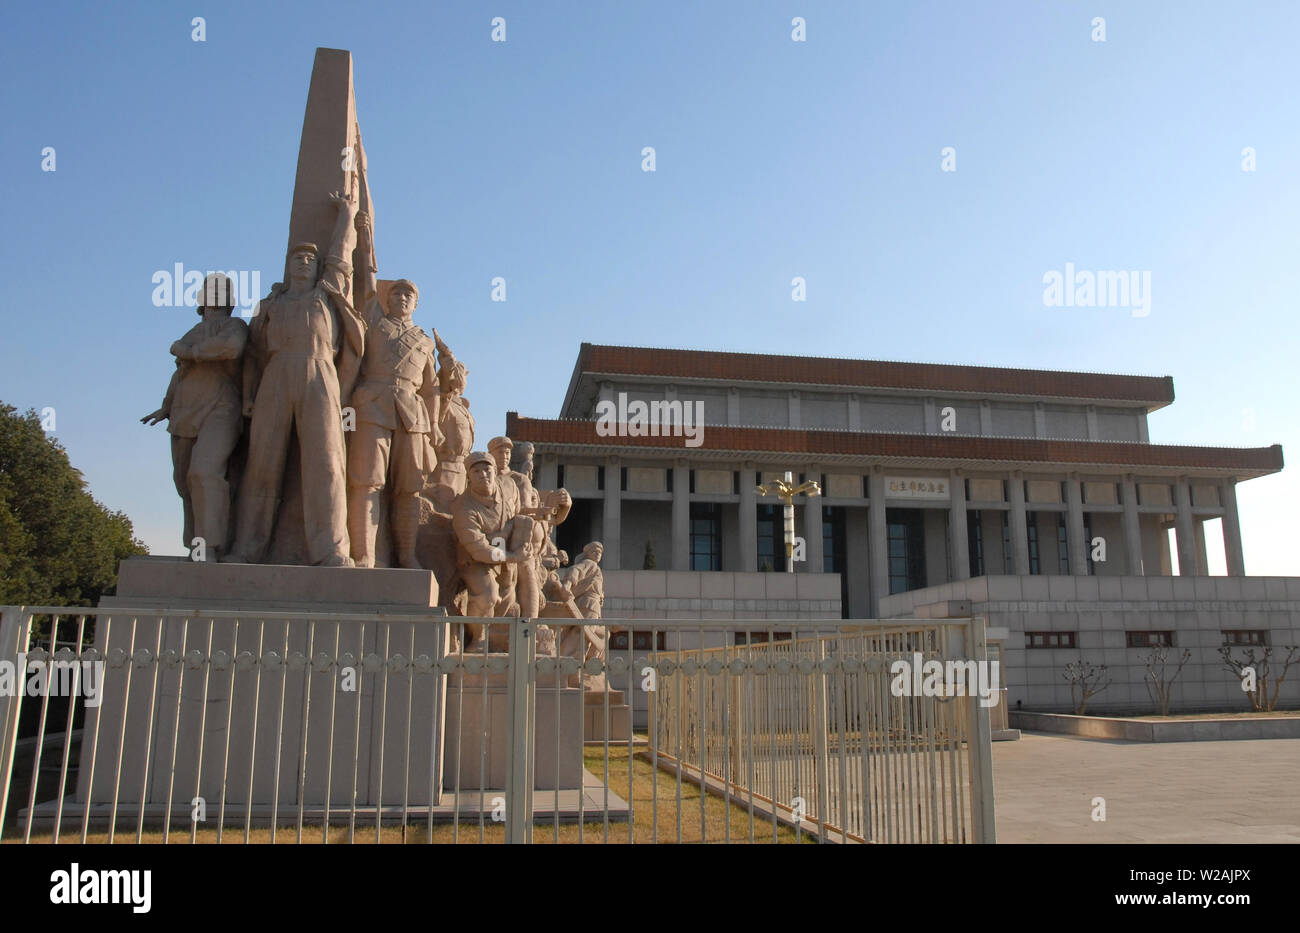 Revolutionary monument in front of the Mausoleum of Mao Zedong (Chairman Mao) in Tiananmen Square, Beijing. Tiananmen Square, Mausoleum of Mao Beijing Stock Photo